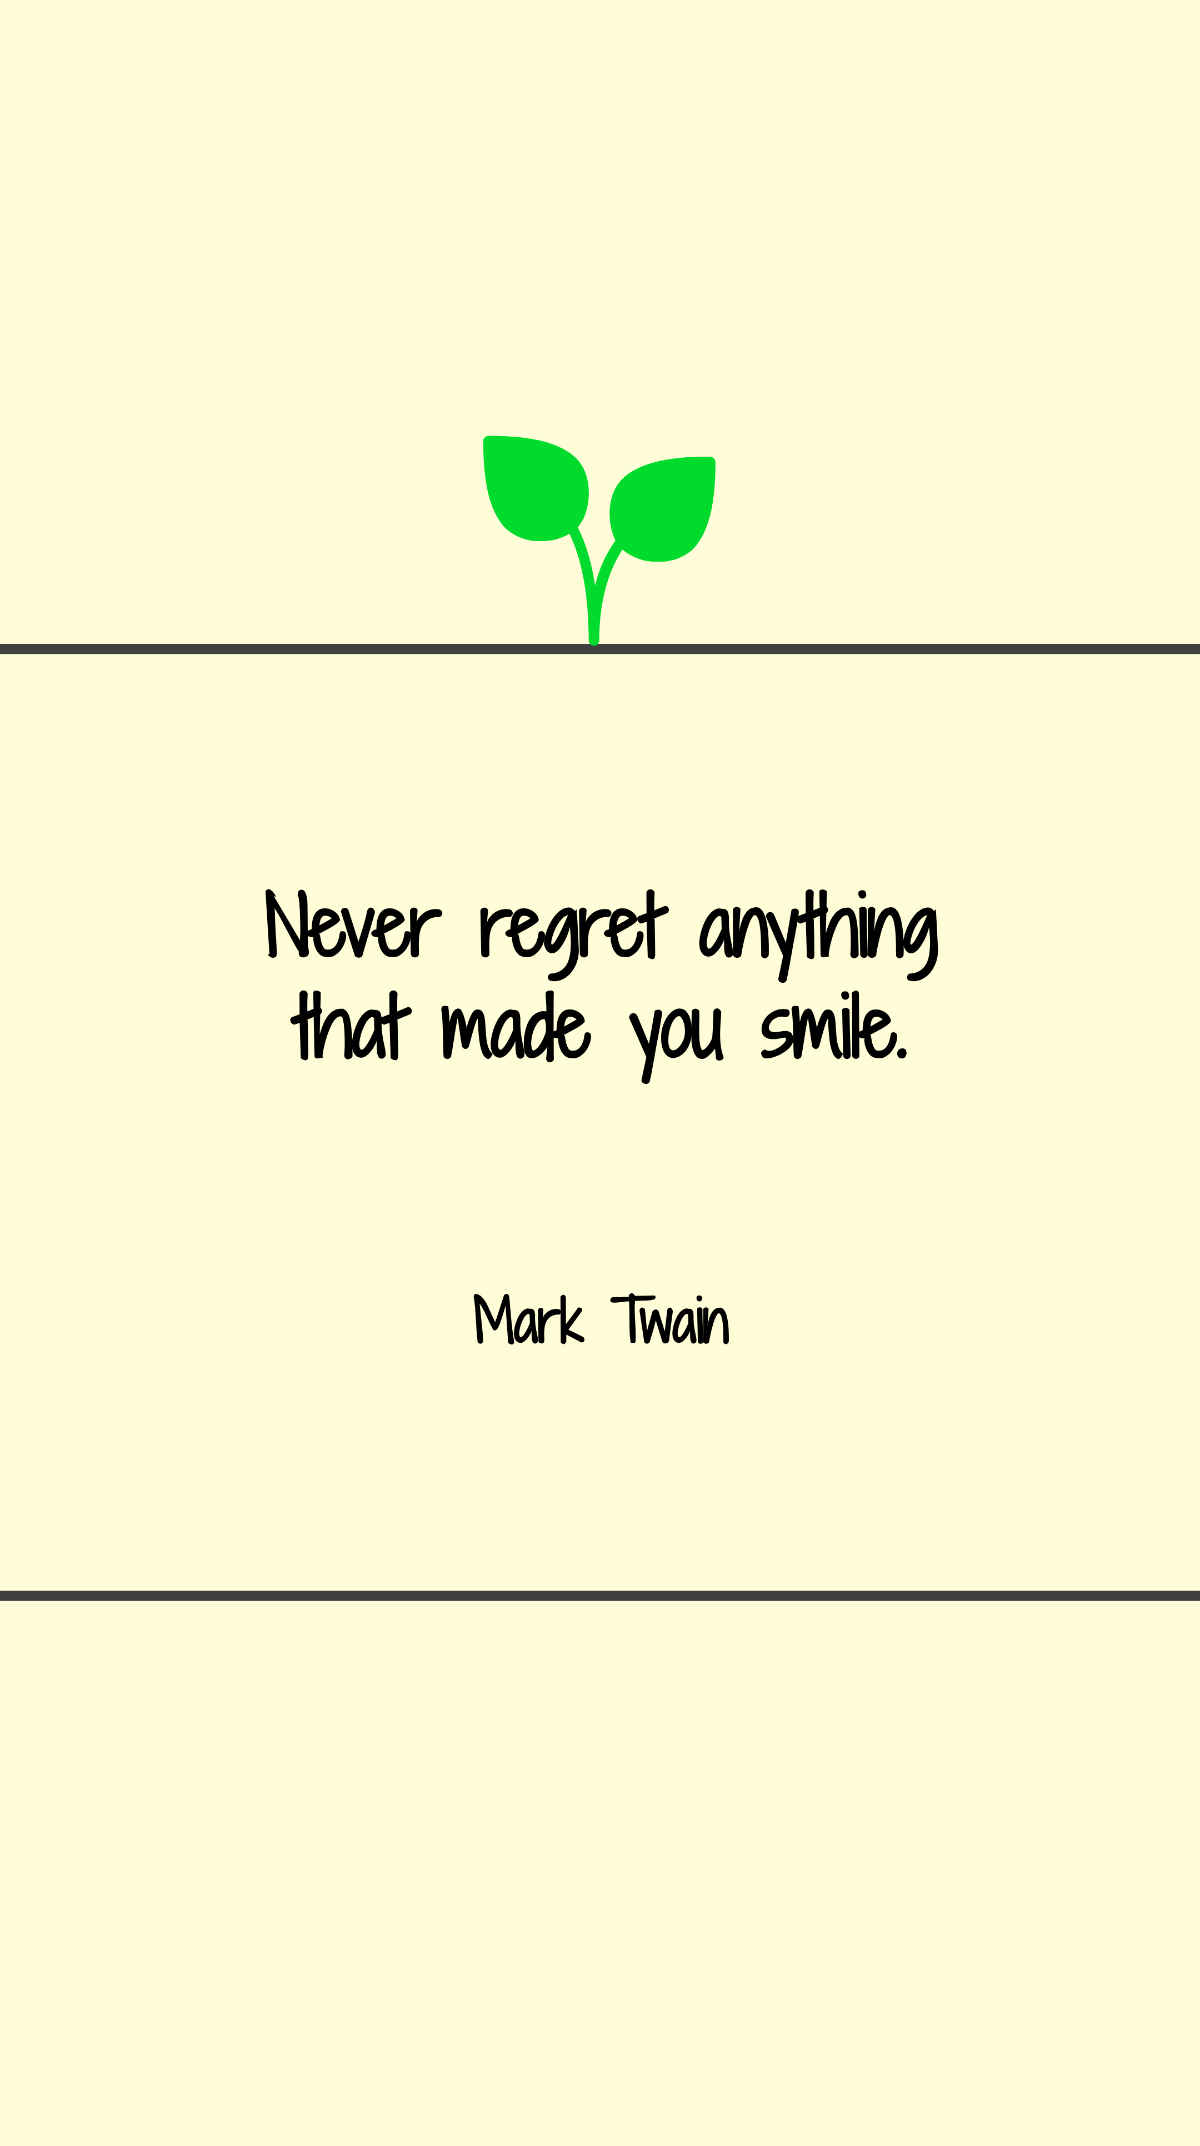 Mark Twain - Never regret anything that made you smile Template